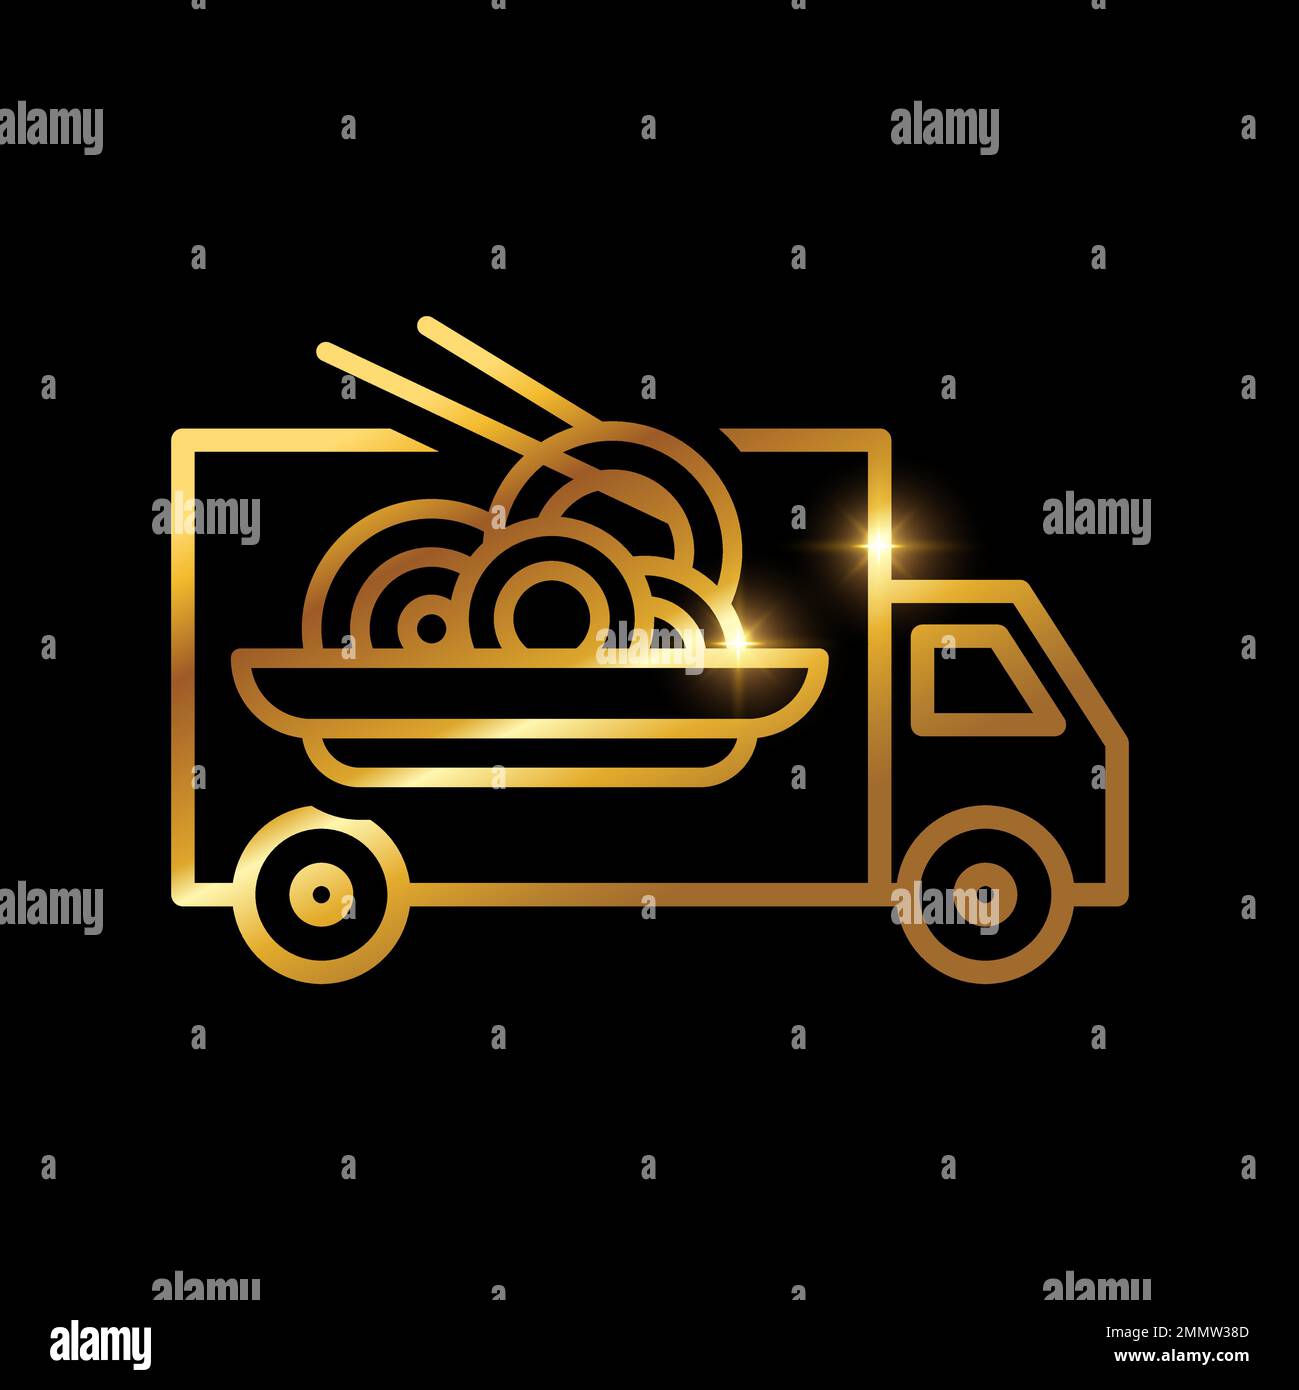 Vector Illustration of Golden Food Truck Delivery Service Icon in black background with gold shine effect Stock Vector